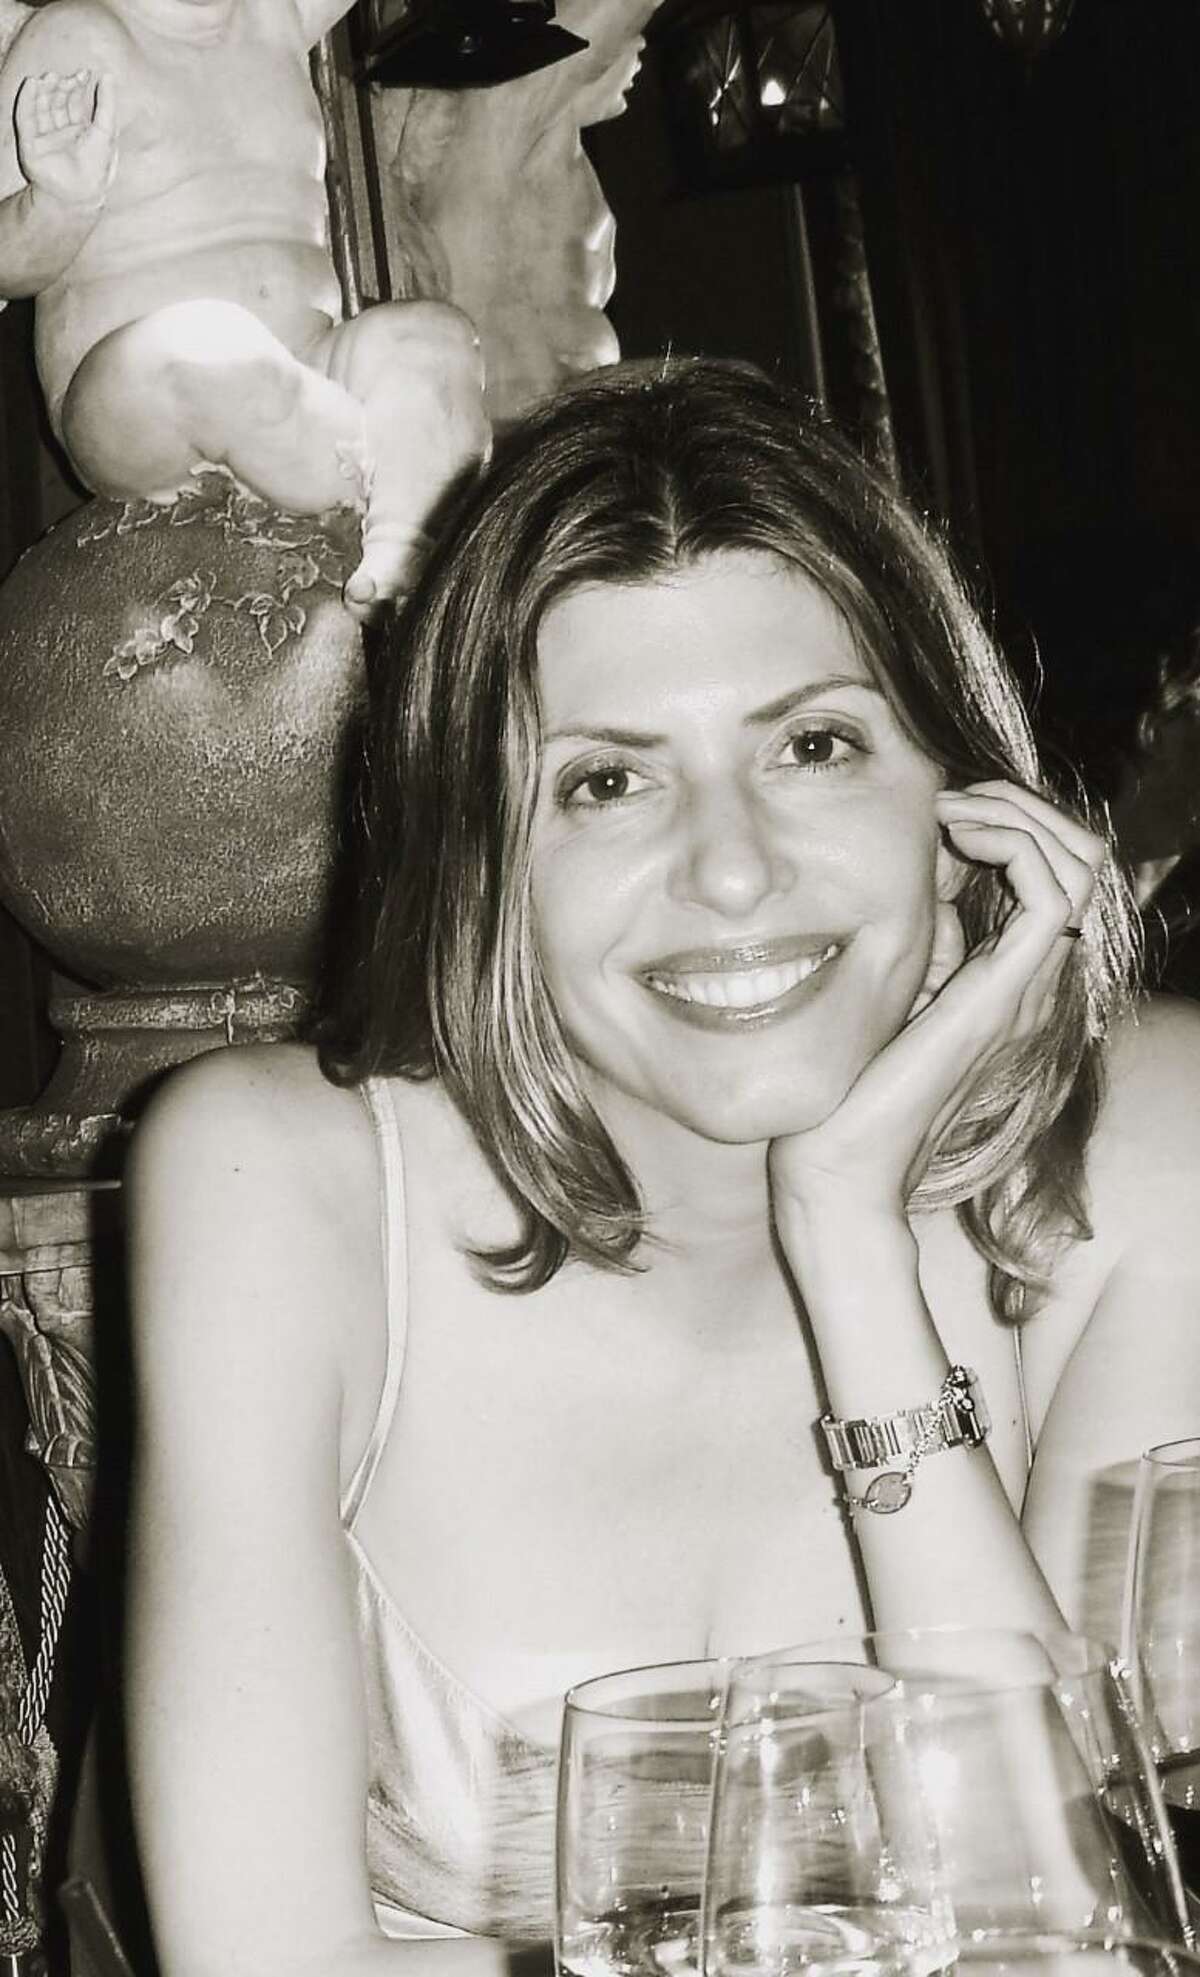 Jennifer Dulos, 50, has been the subject of a search by New Canaan and State Police since she was reported missing Friday evening, May 24, 2019.